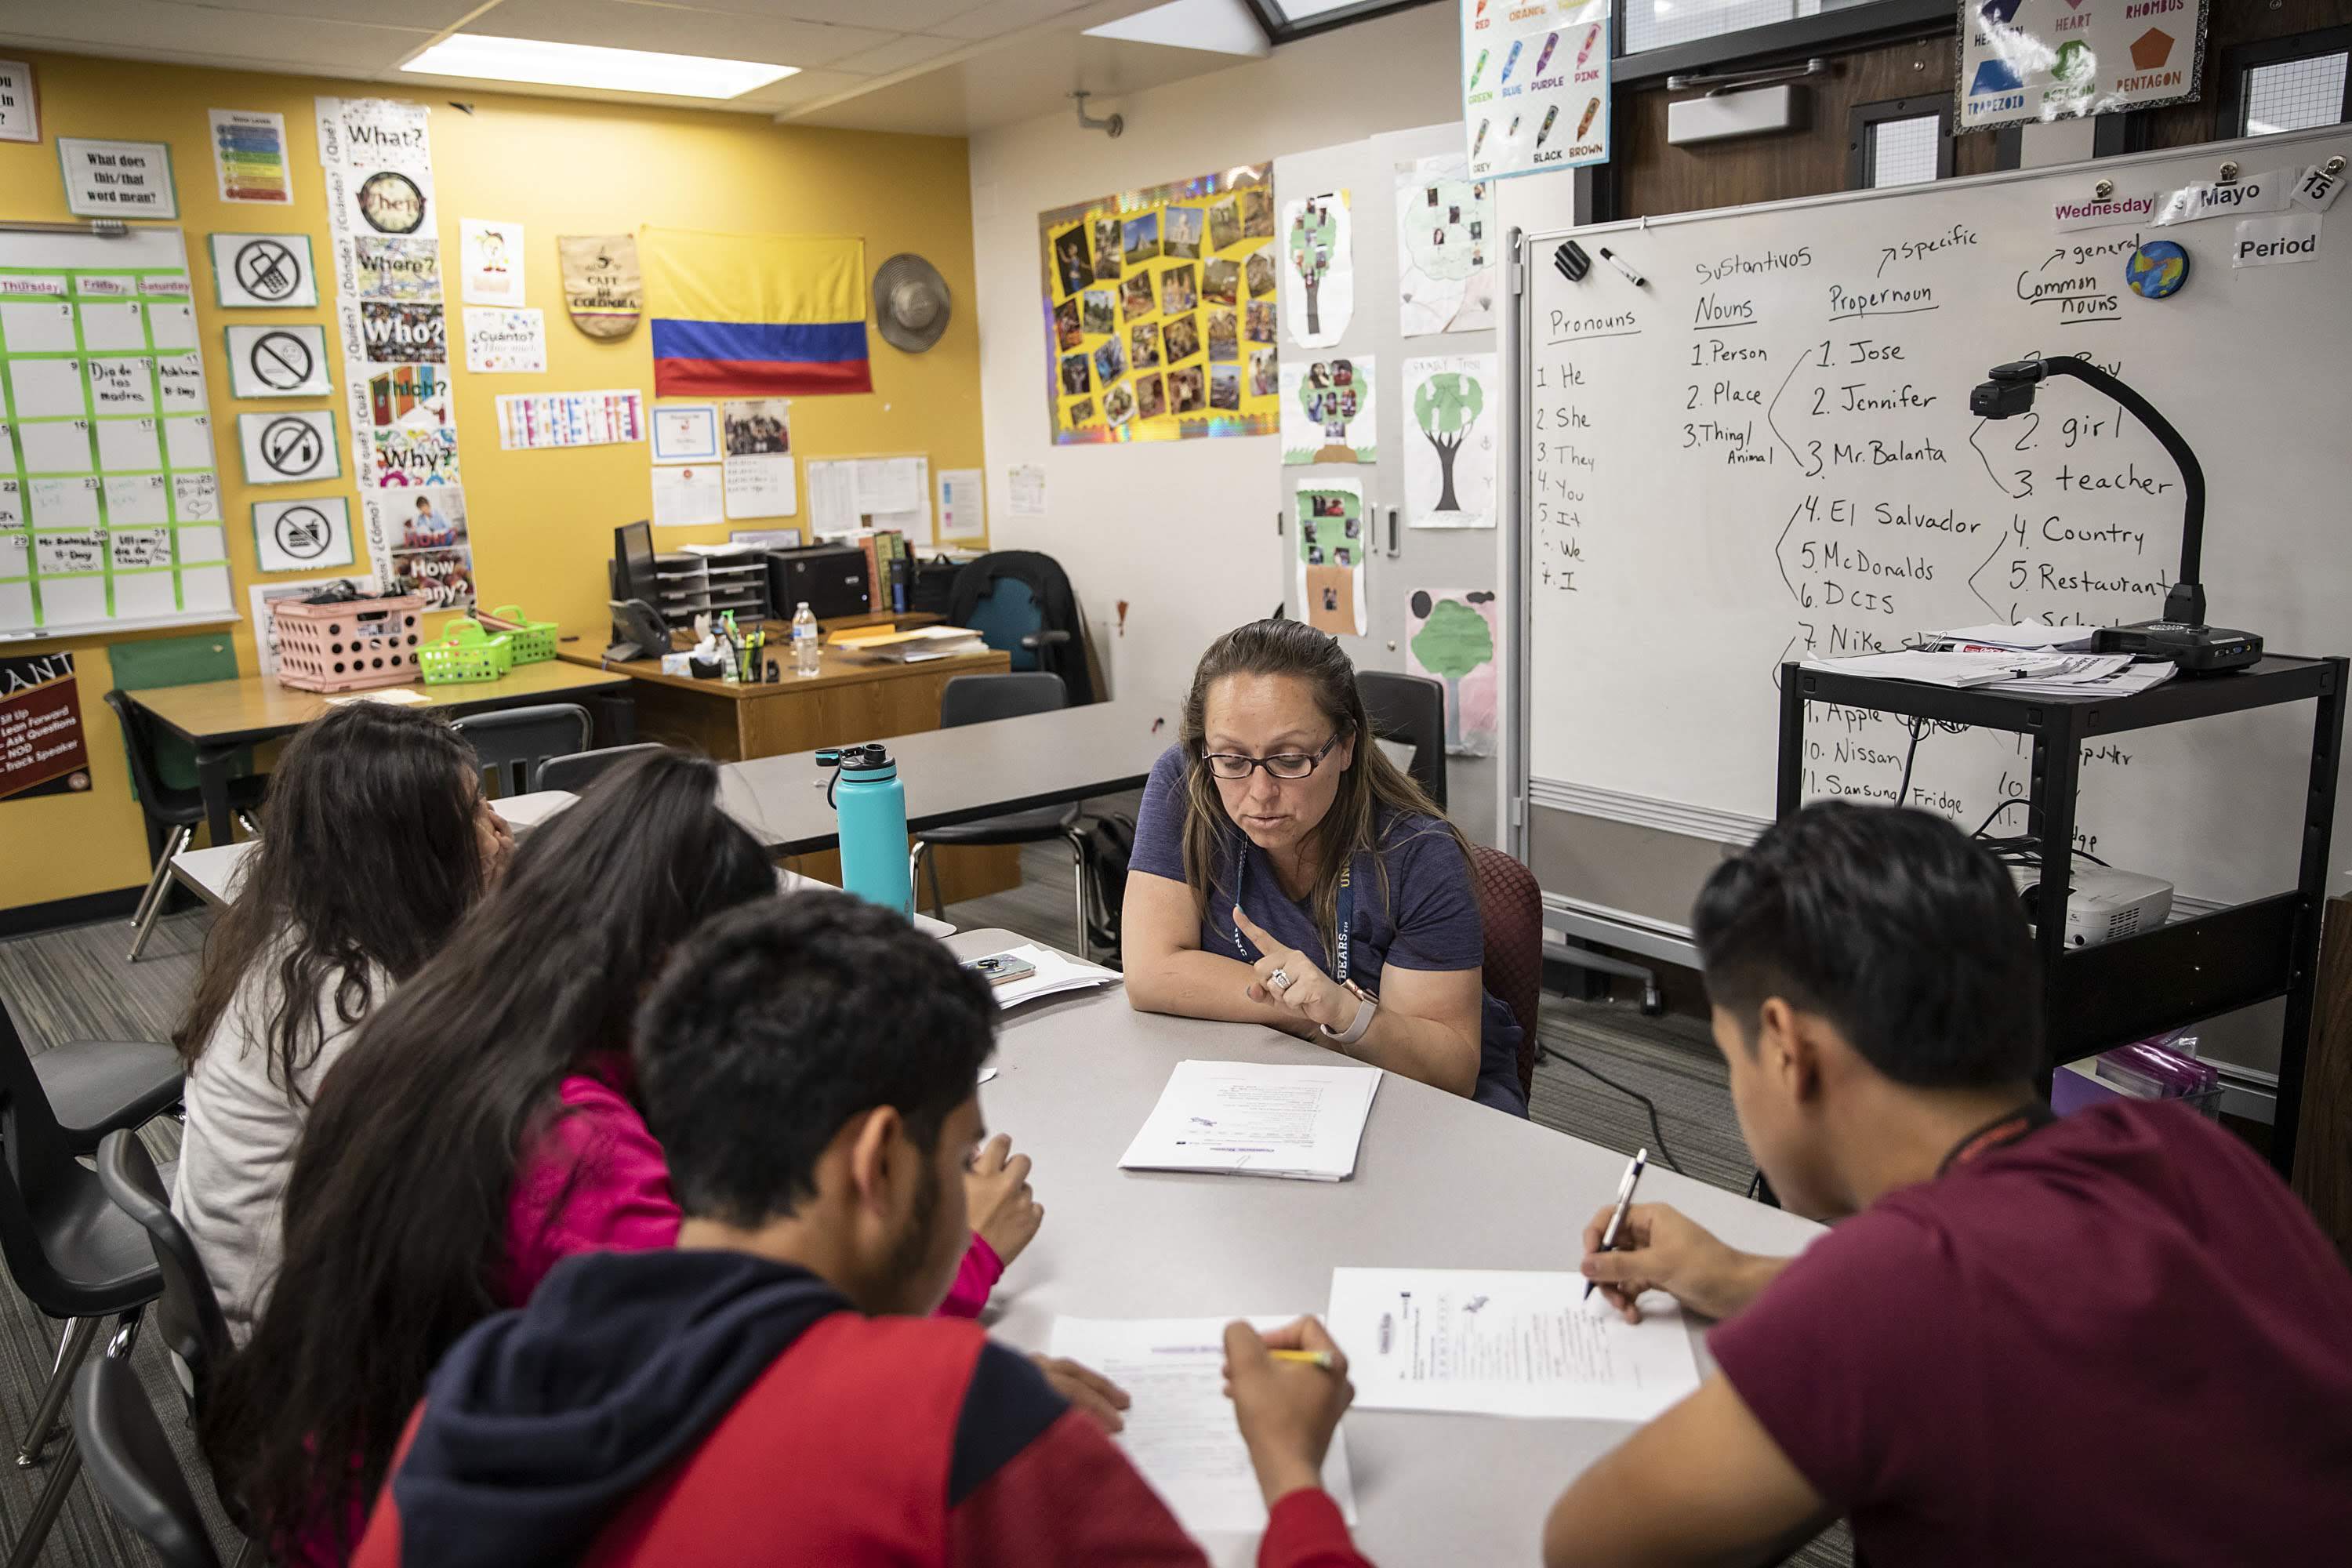 With students speaking 10 different languages, teachers at Indianapolis'  'Newcomer' school find creative ways to communicate - Chalkbeat